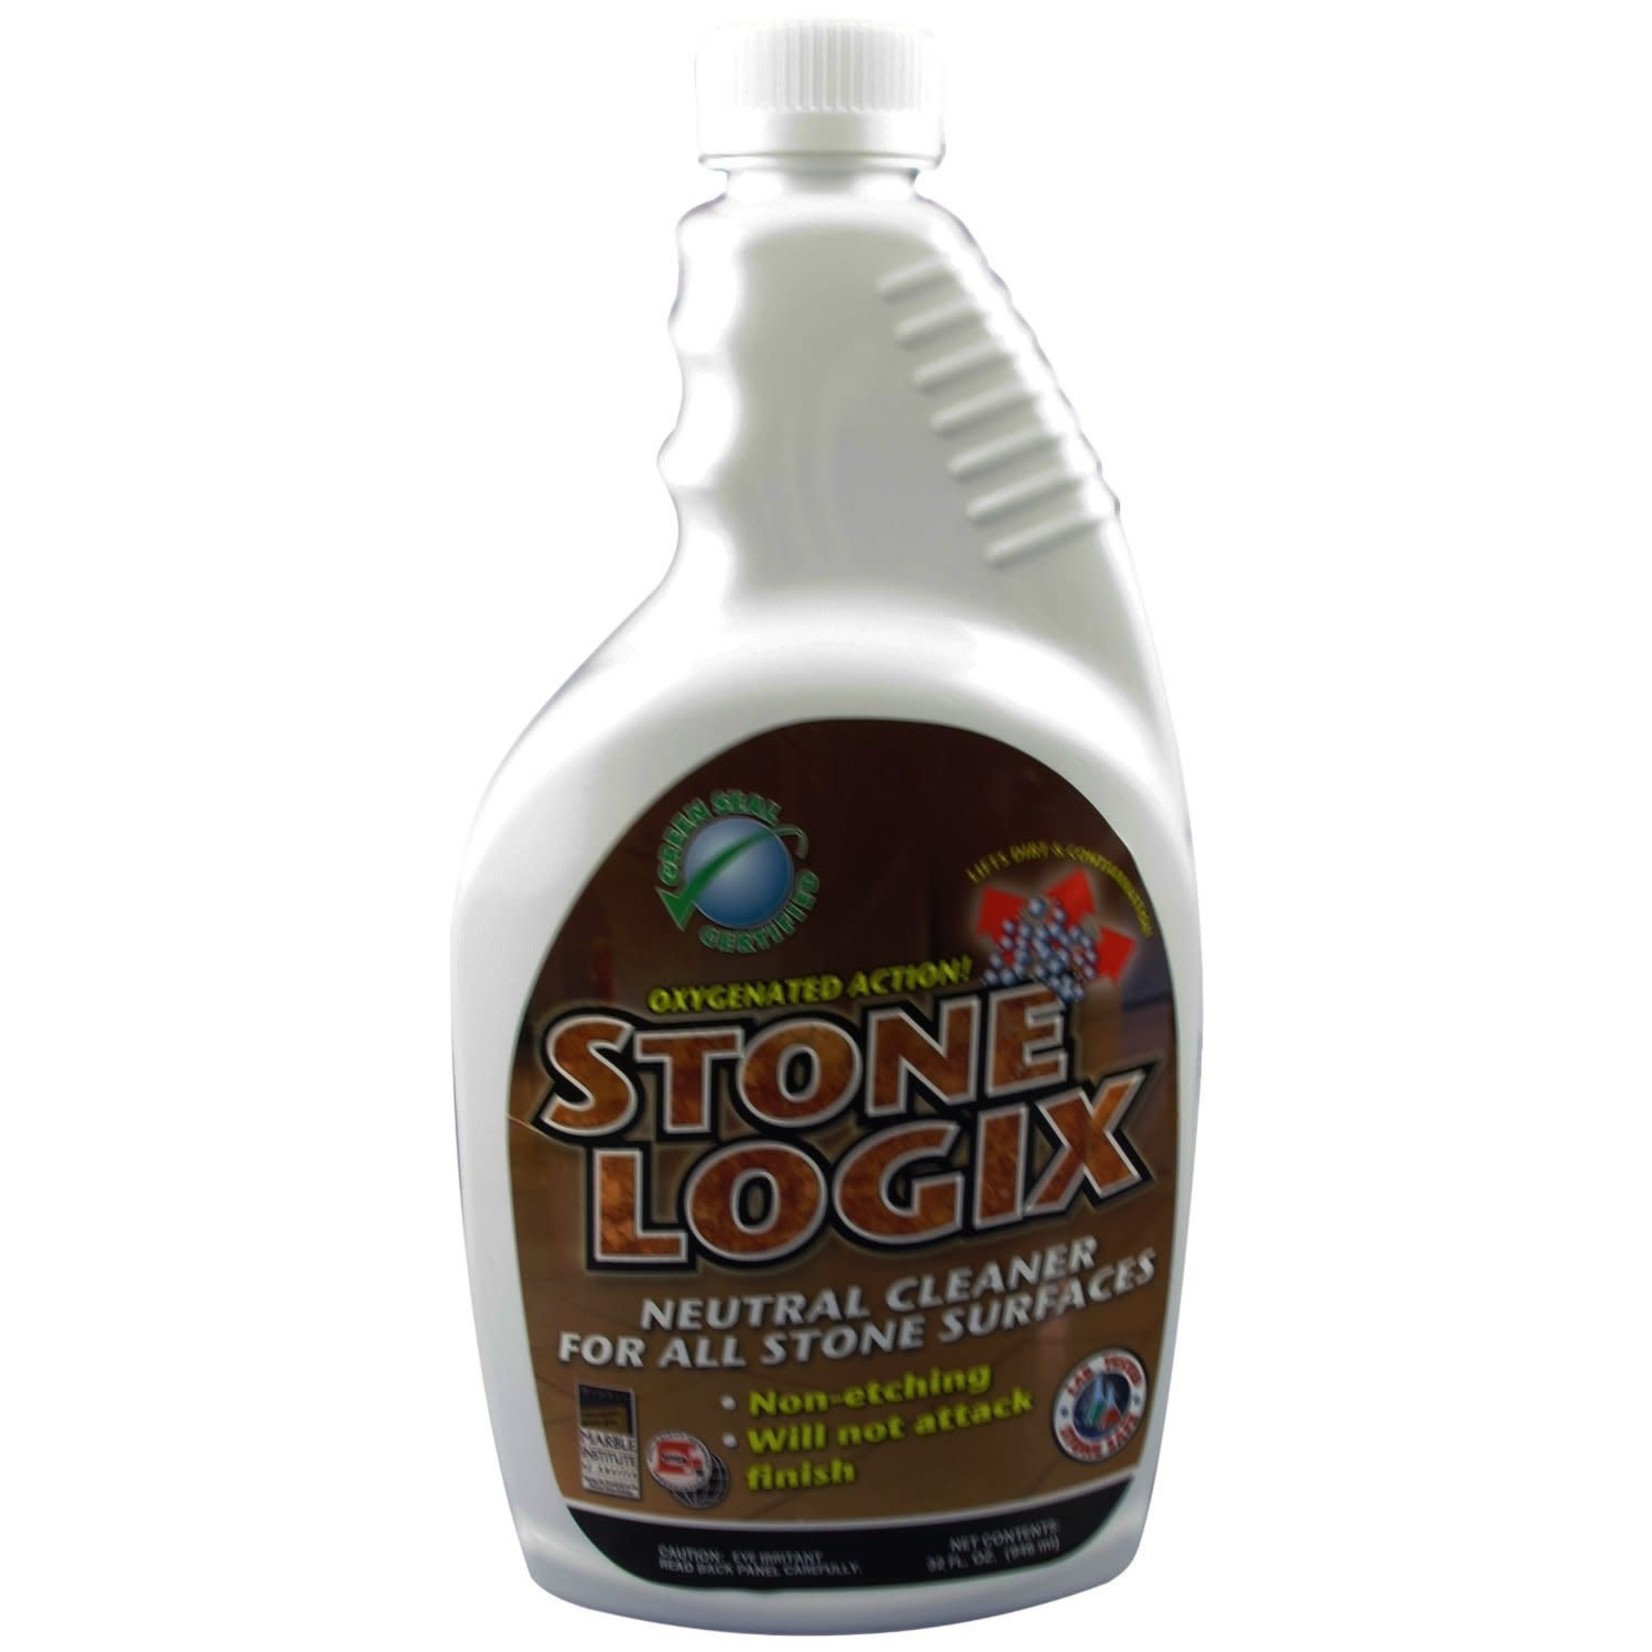 CORE Products Stone Logix Neutral Cleaner for All Services - 32oz